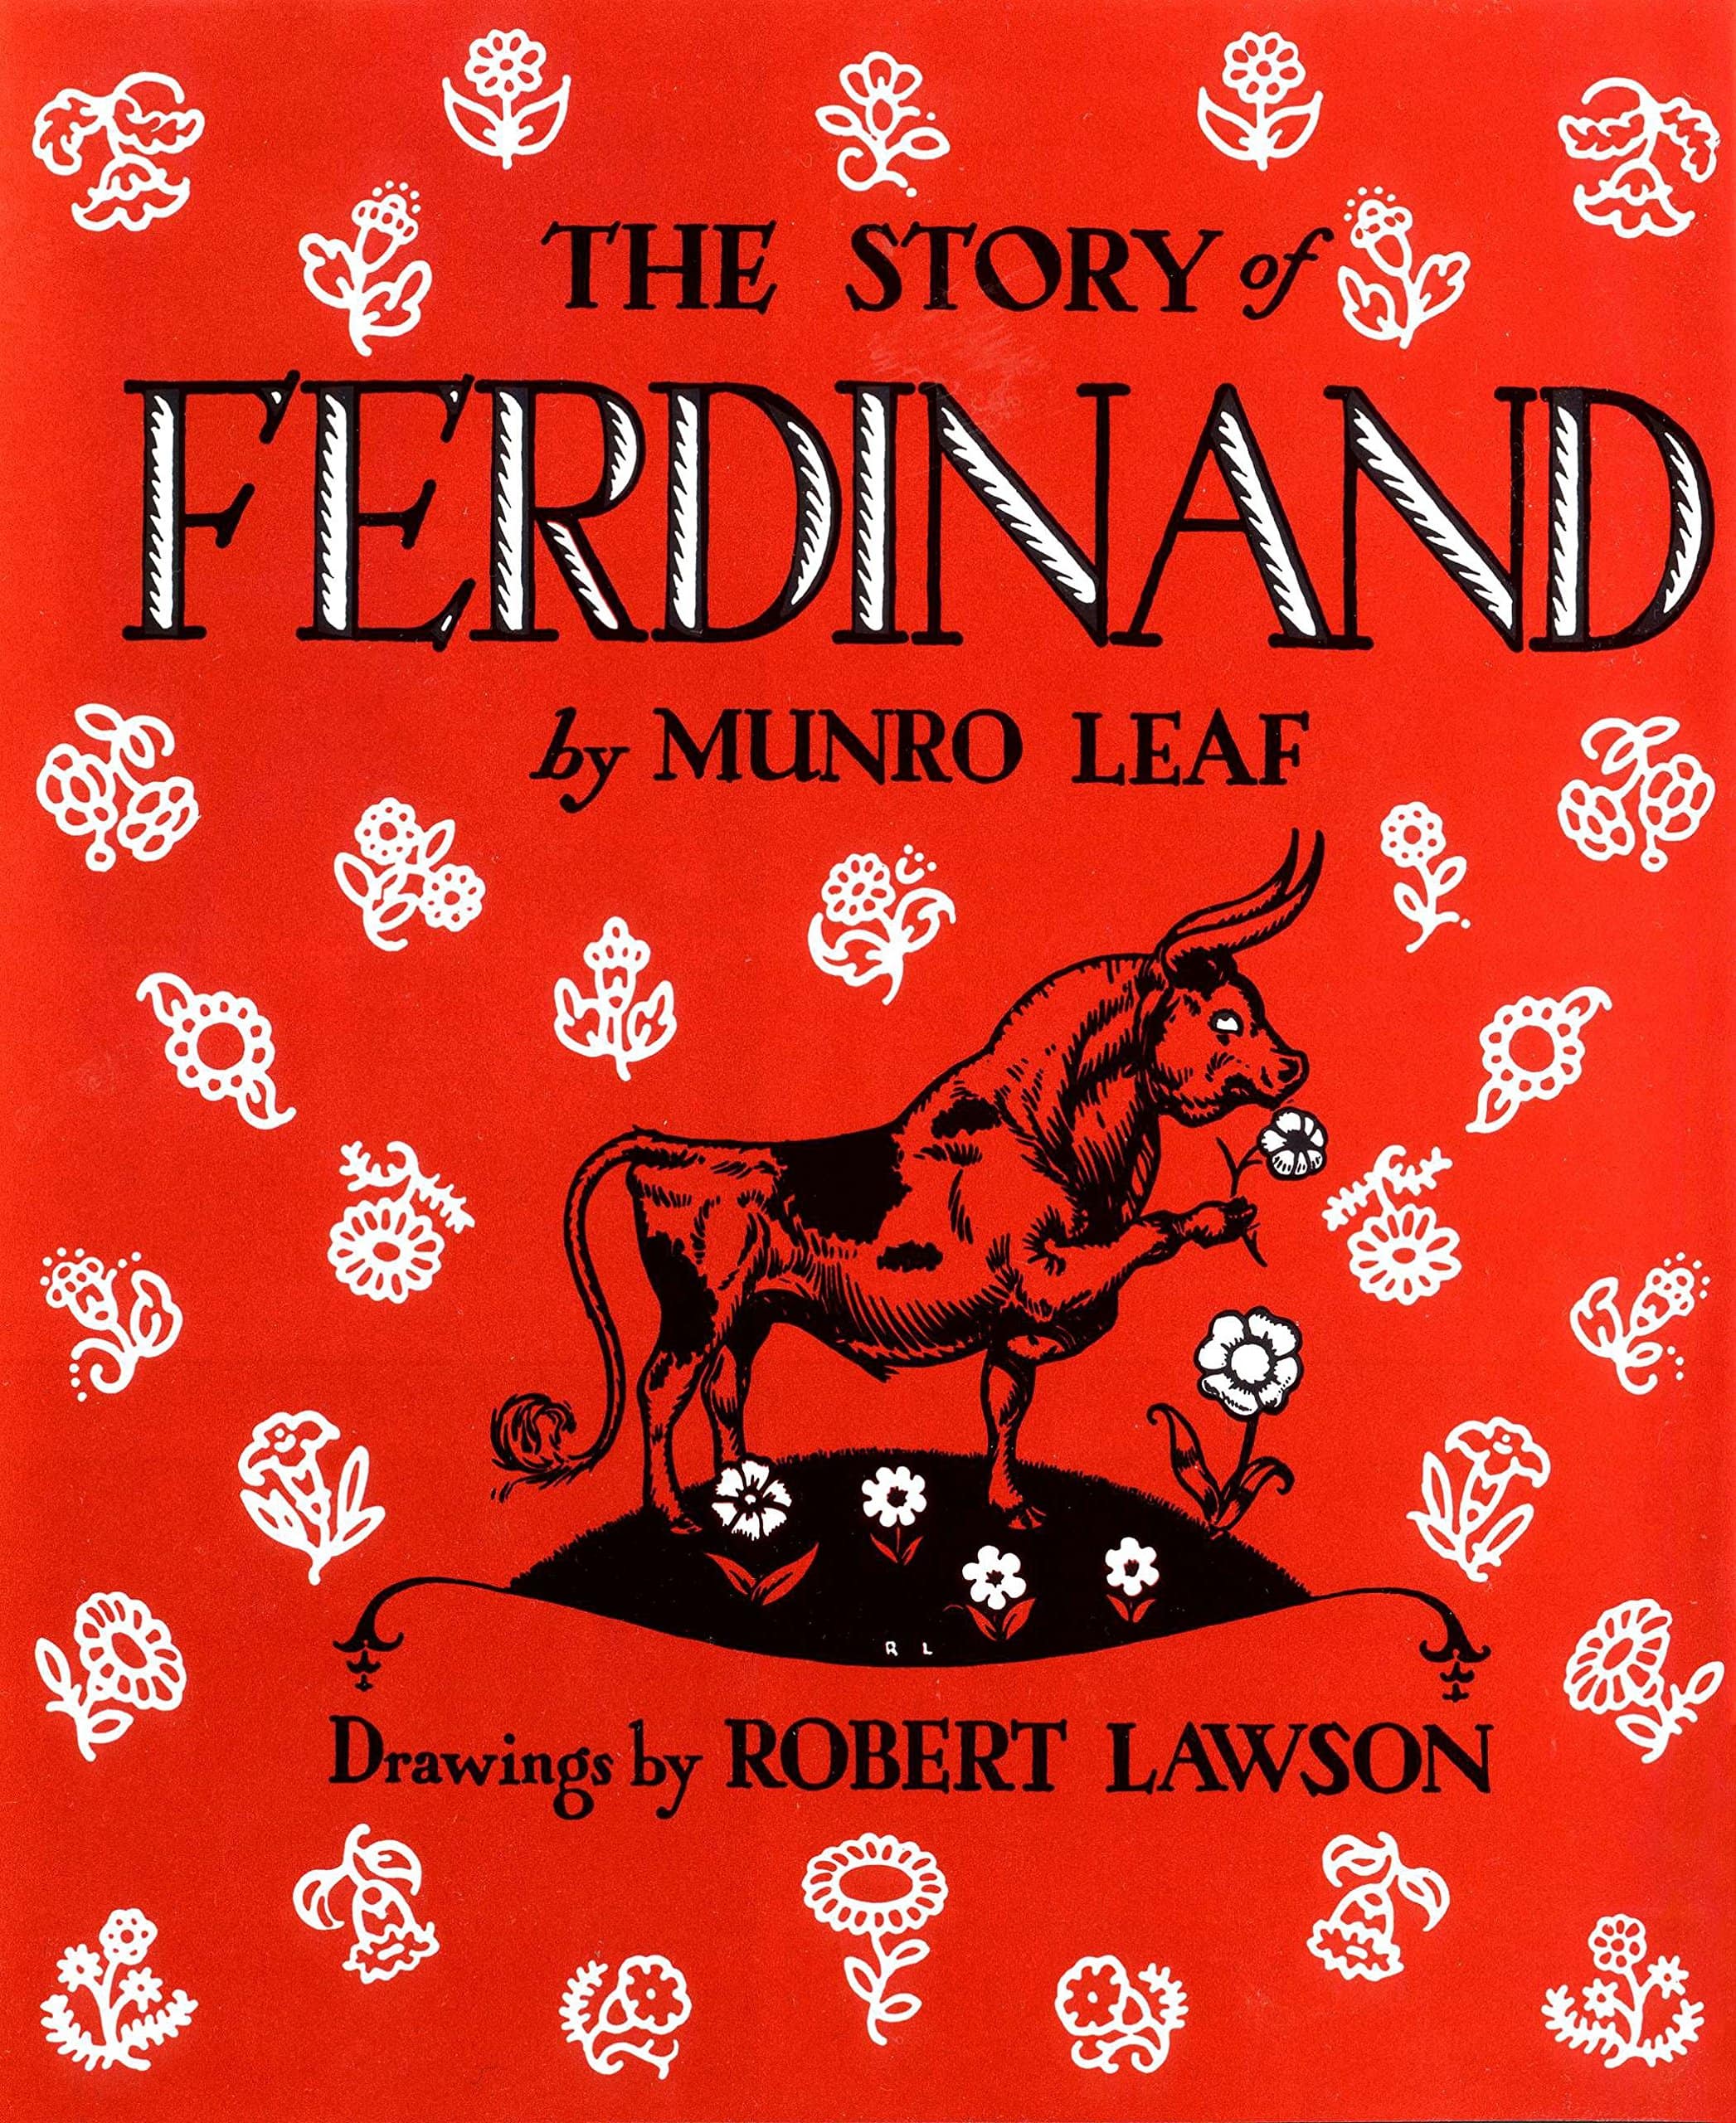 "The Story of Ferdinand" by Munro Leaf